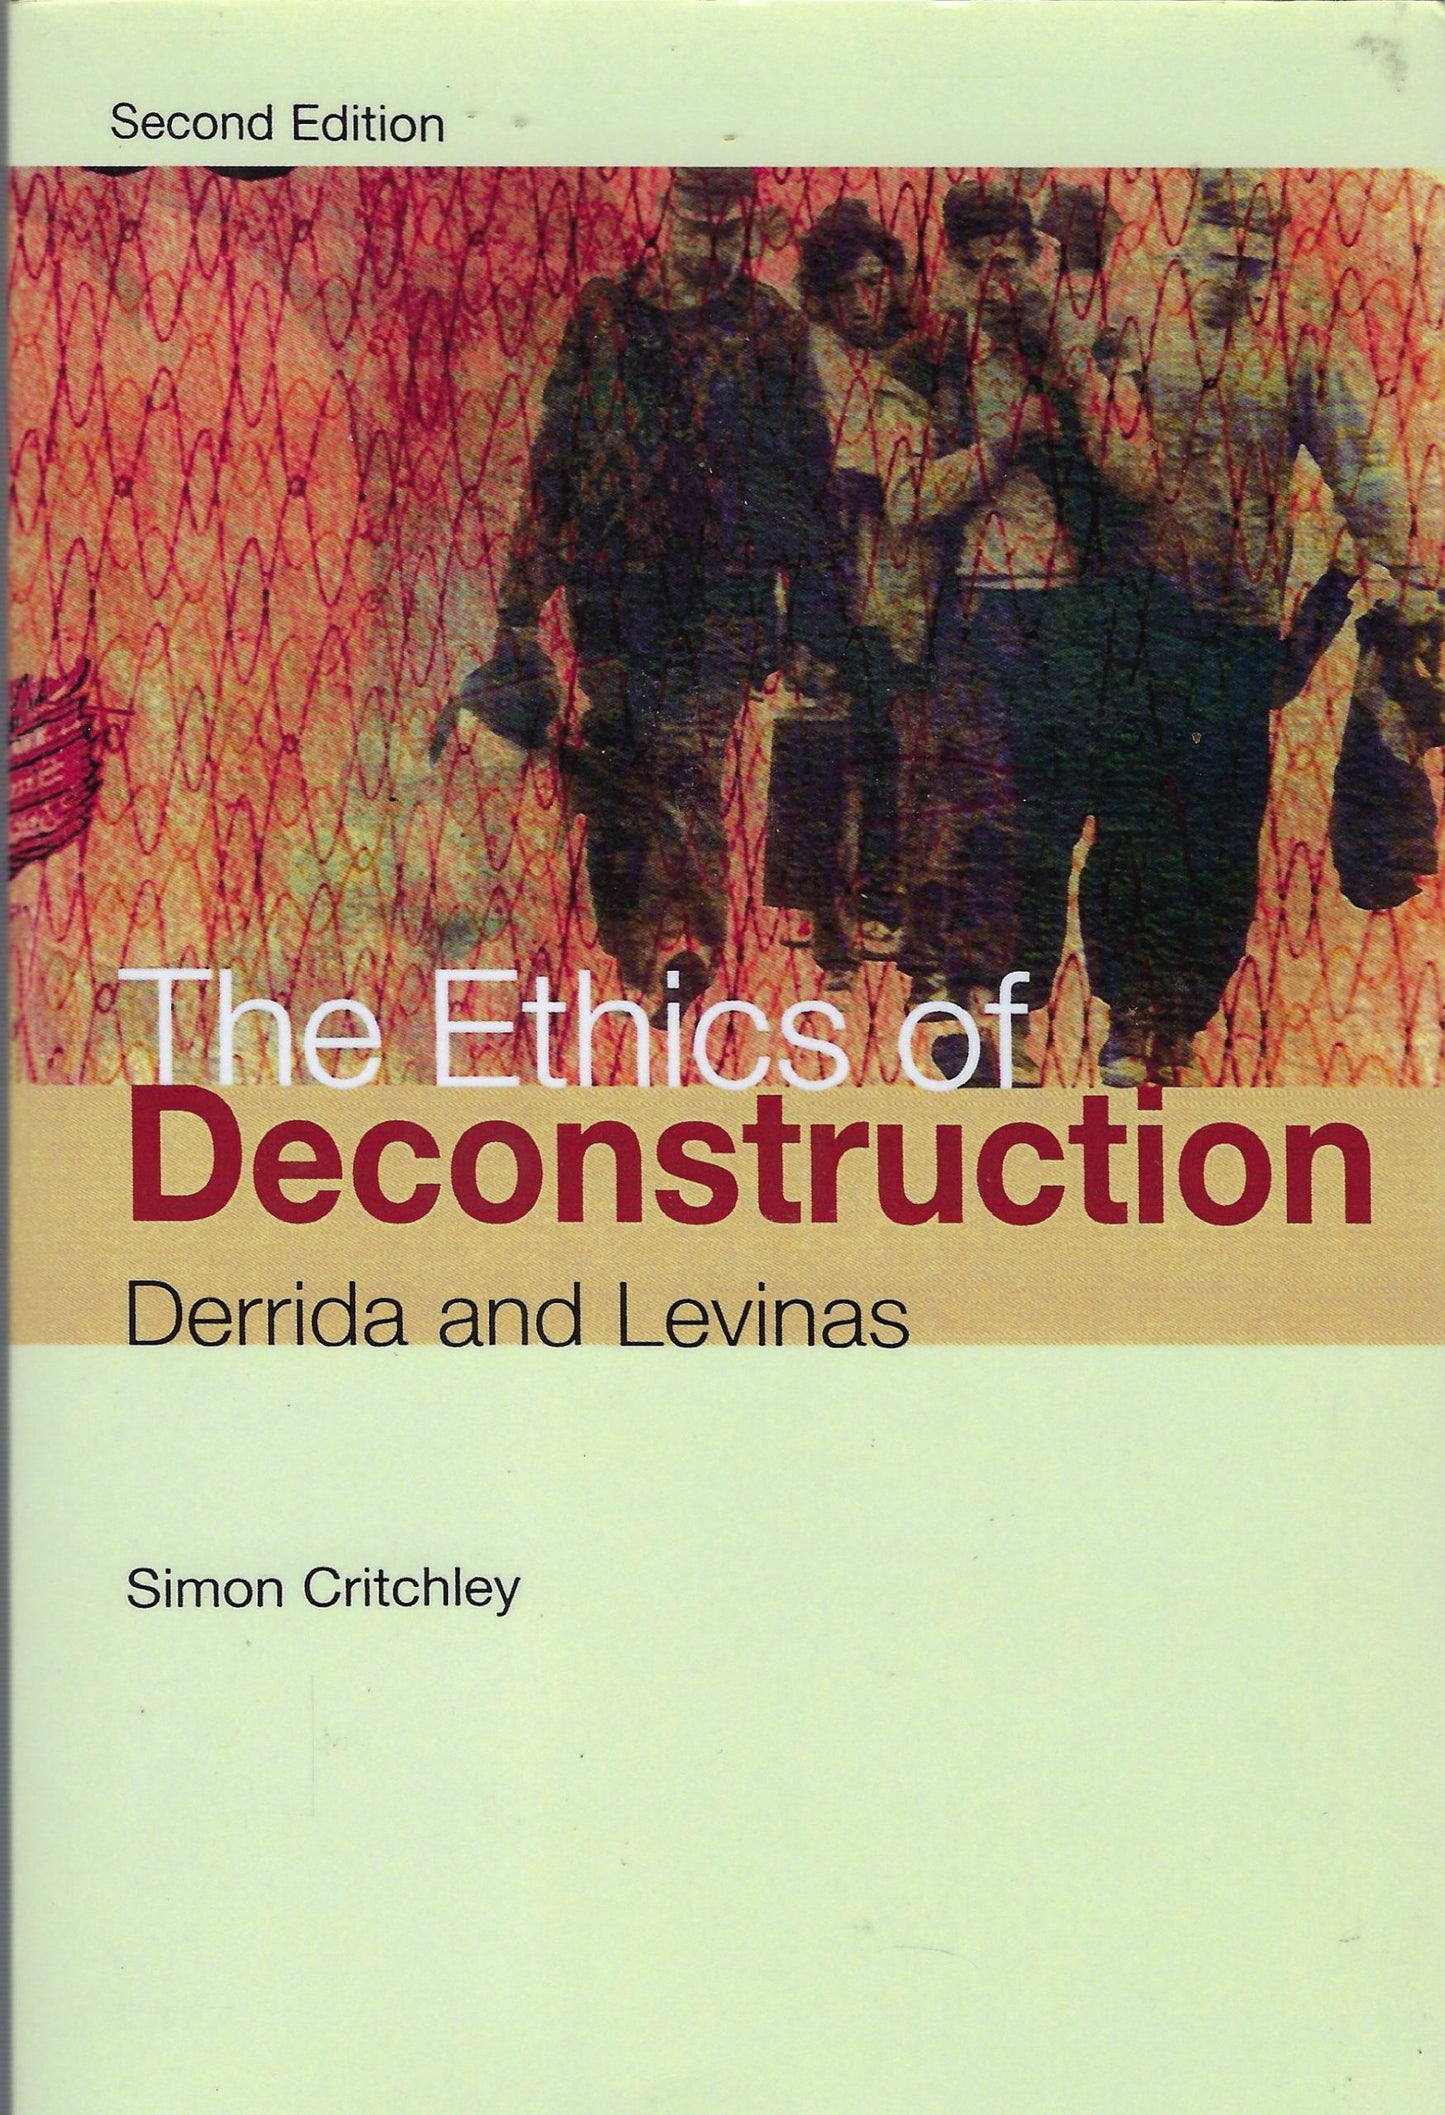 The ethics of deconstruction Derrida and Levinas